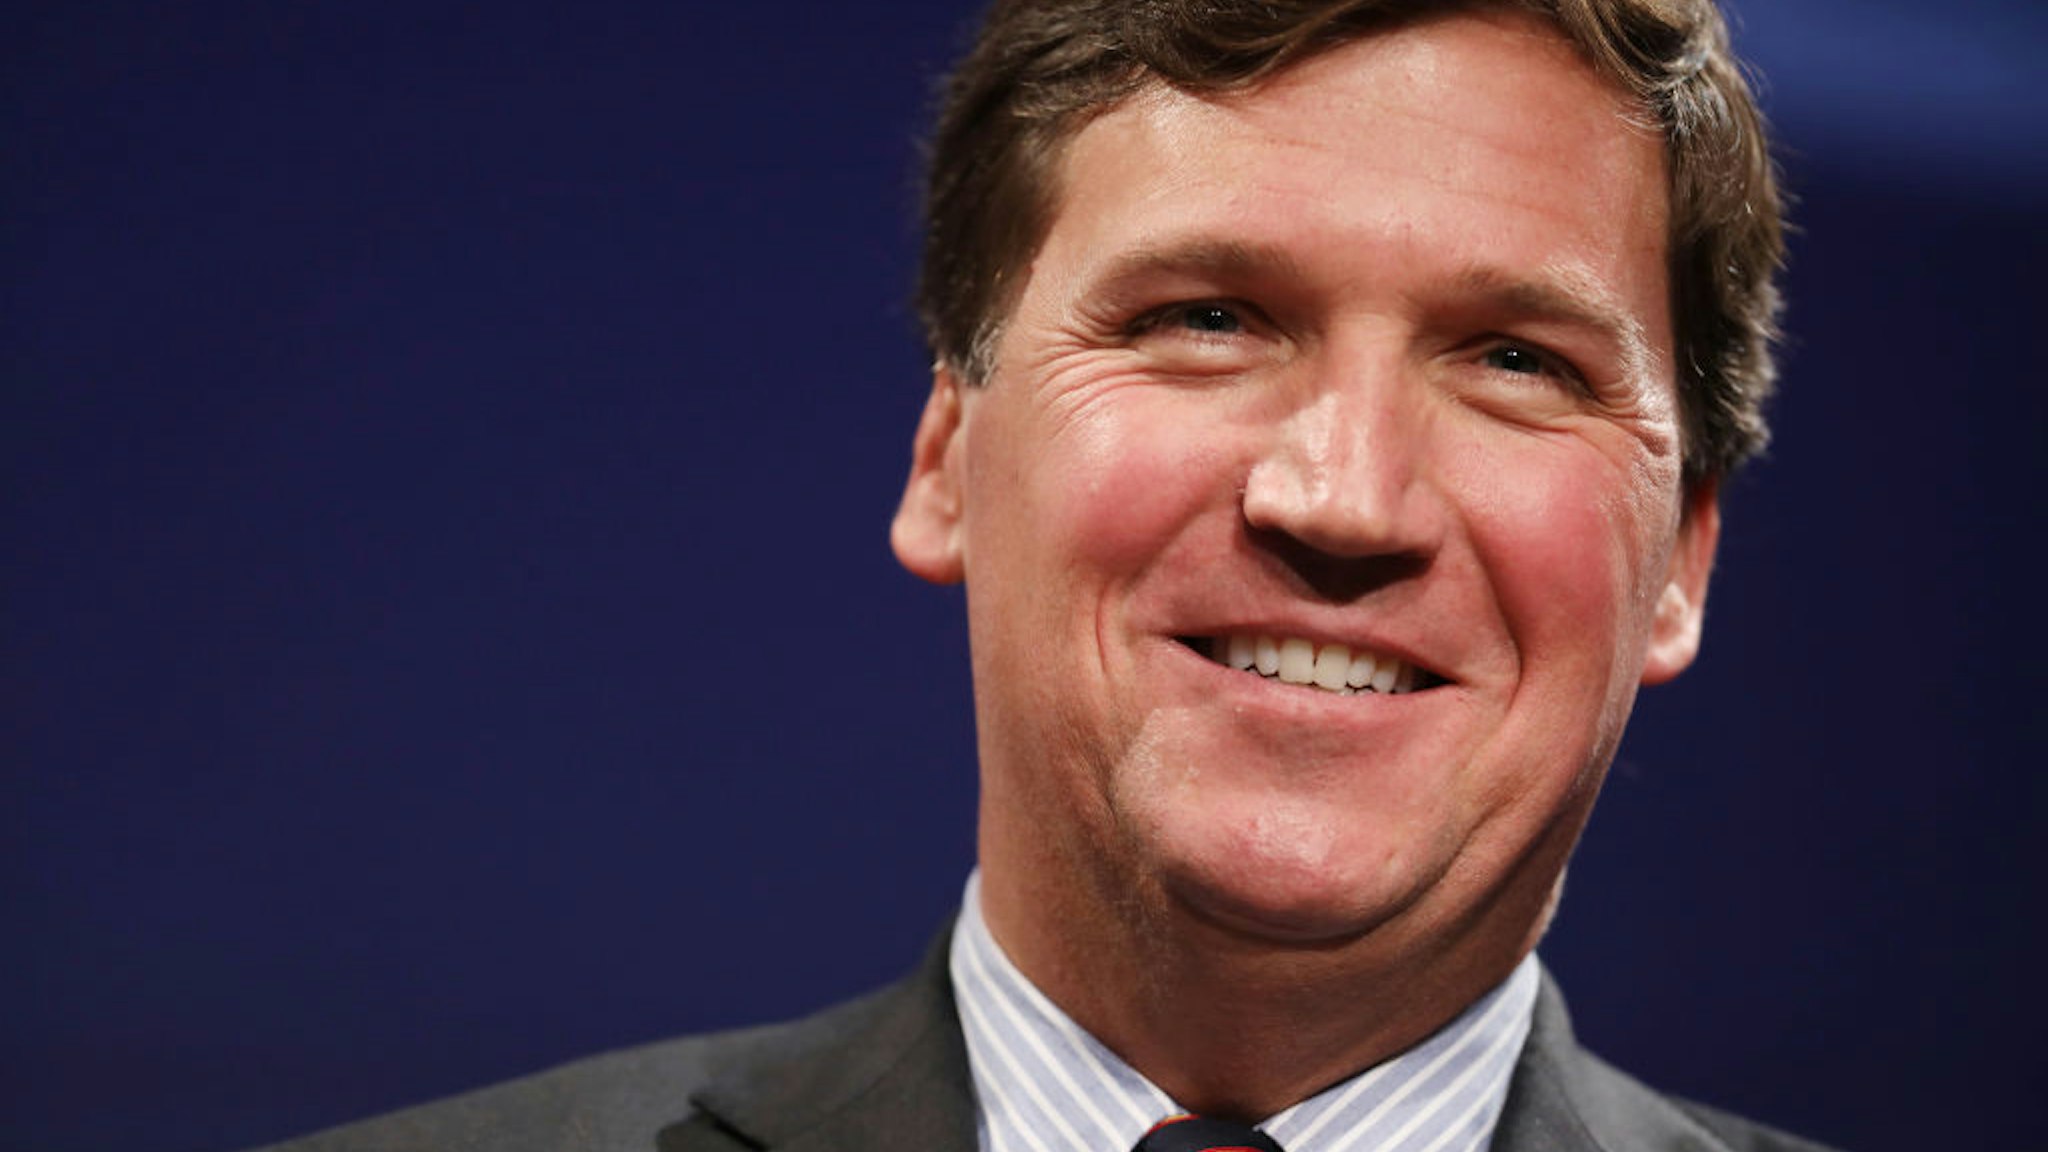 Fox News host Tucker Carlson discusses 'Populism and the Right' during the National Review Institute's Ideas Summit at the Mandarin Oriental Hotel March 29, 2019 in Washington, DC. Carlson talked about a large variety of topics including dropping testosterone levels, increasing rates of suicide, unemployment, drug addiction and social hierarchy at the summit, which had the theme 'The Case for the American Experiment.' (Photo by Chip Somodevilla/Getty Images)